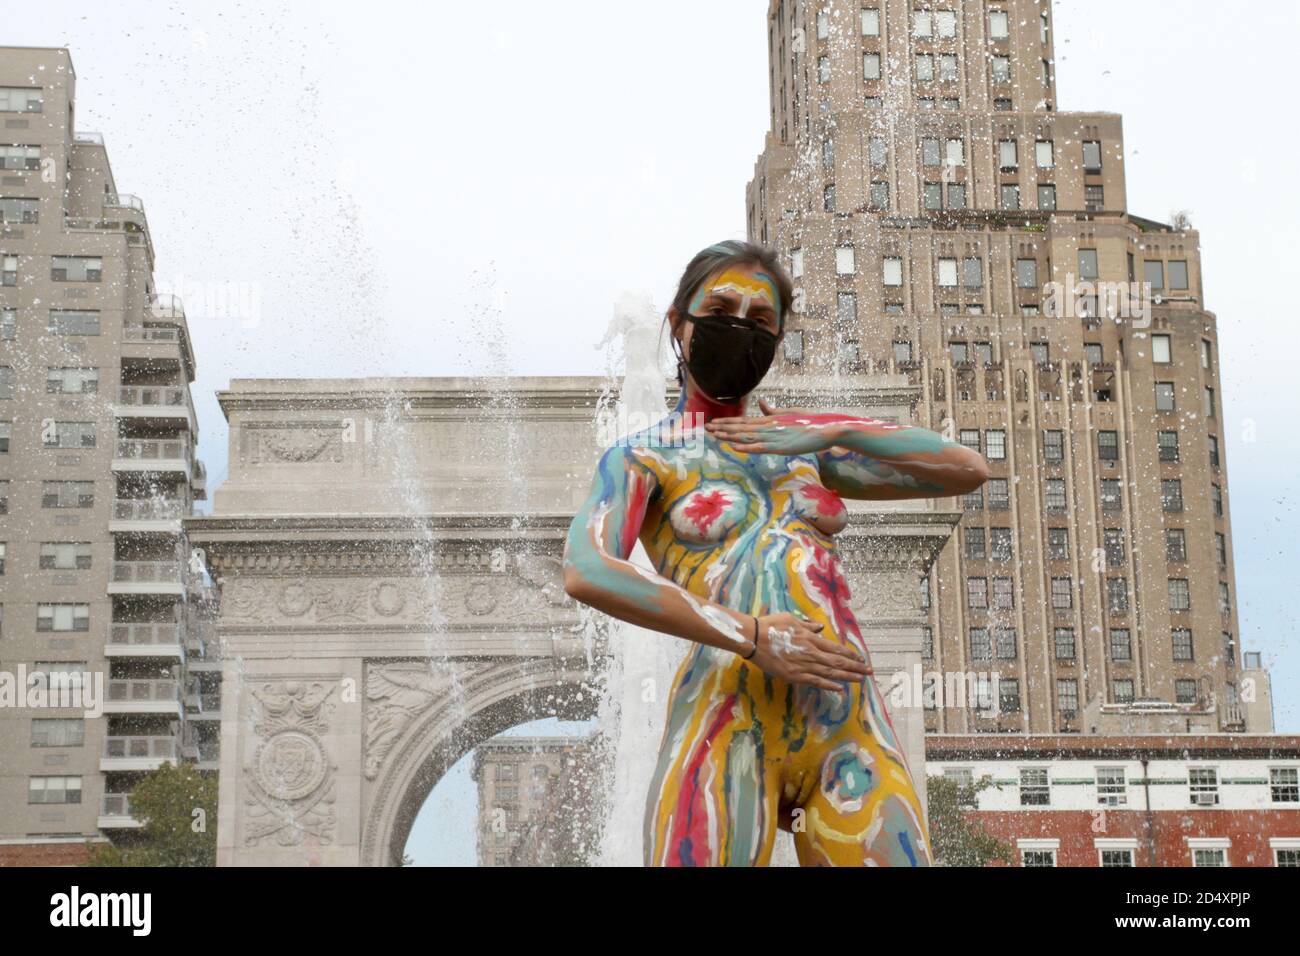 October 10, 2020, New York, New York, USA: Andy Golub founder and Executive Director of Human Connection Arts paints two models near the Washington Square Arch in New York's Greenwich Village neighborhood. (Credit Image: © Bruce Cotler/ZUMA Wire) Stock Photo